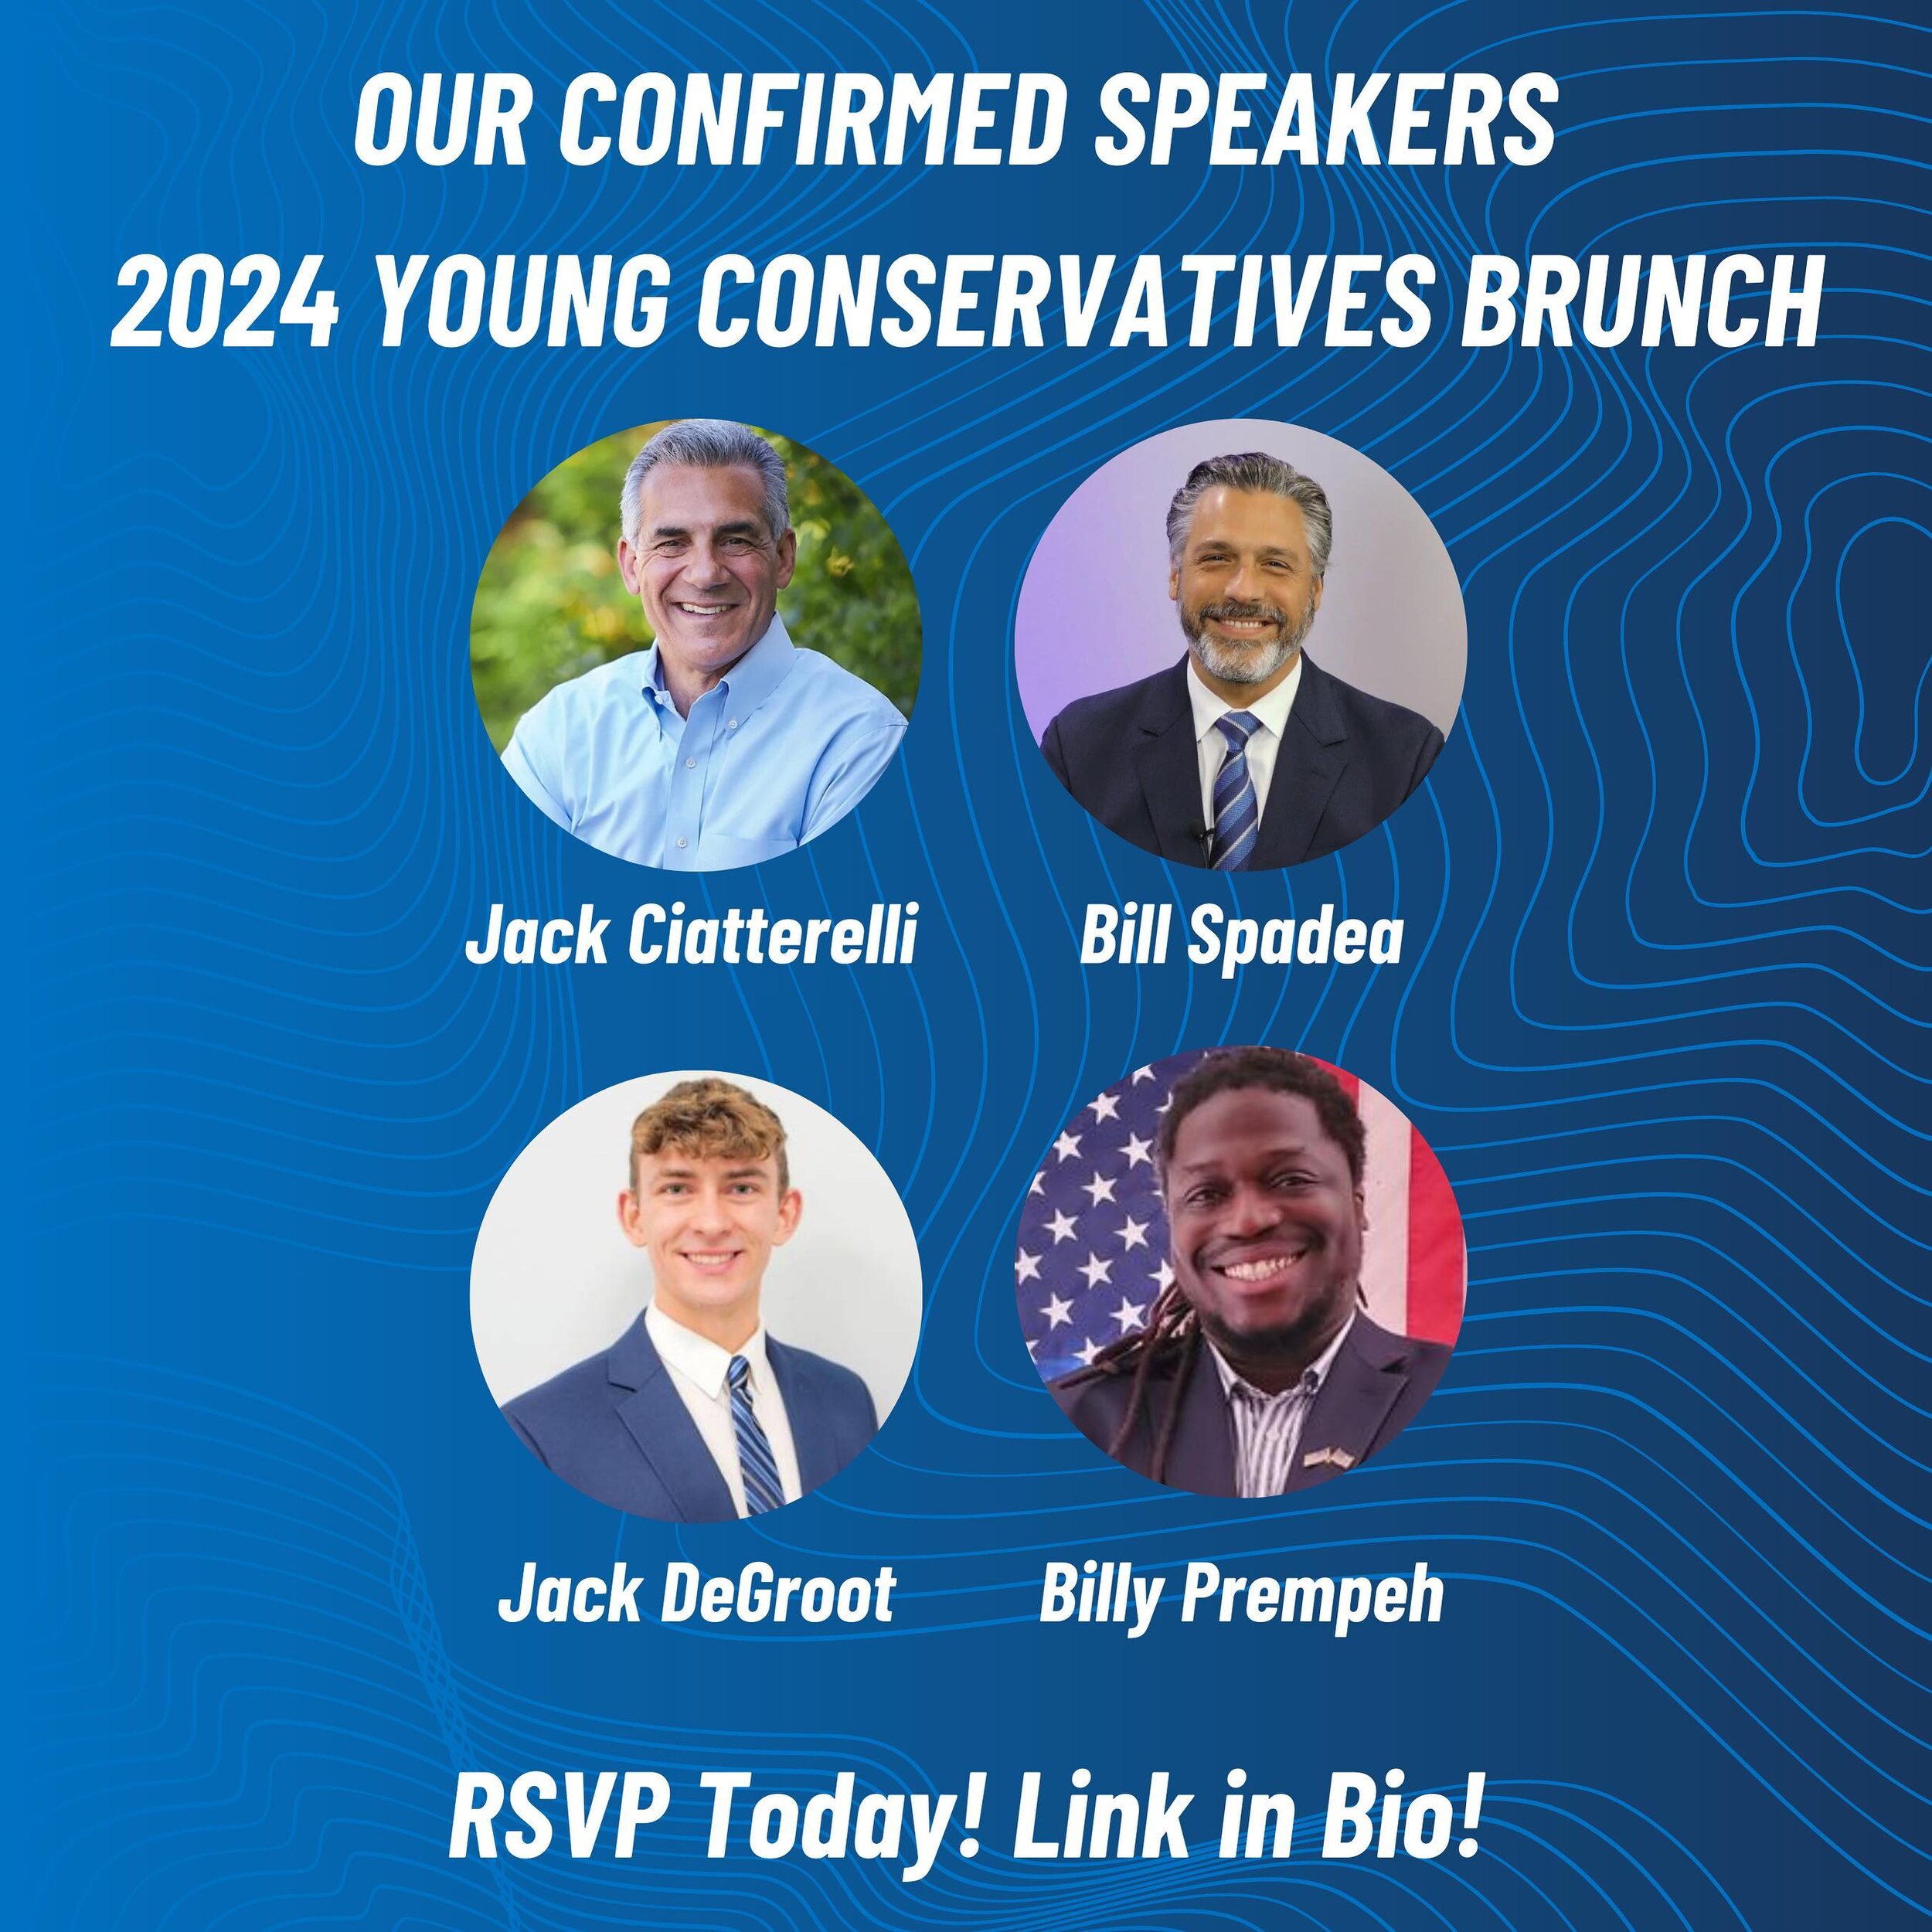 RSVP today for our Young Conservatives Brunch on May 11th at 12pm. See details in pinned post. Link to RSVP in Bio. Hope to see you all there!!! #hsreps #leadright #youngconservatives #republicans #conservatives #njhsr